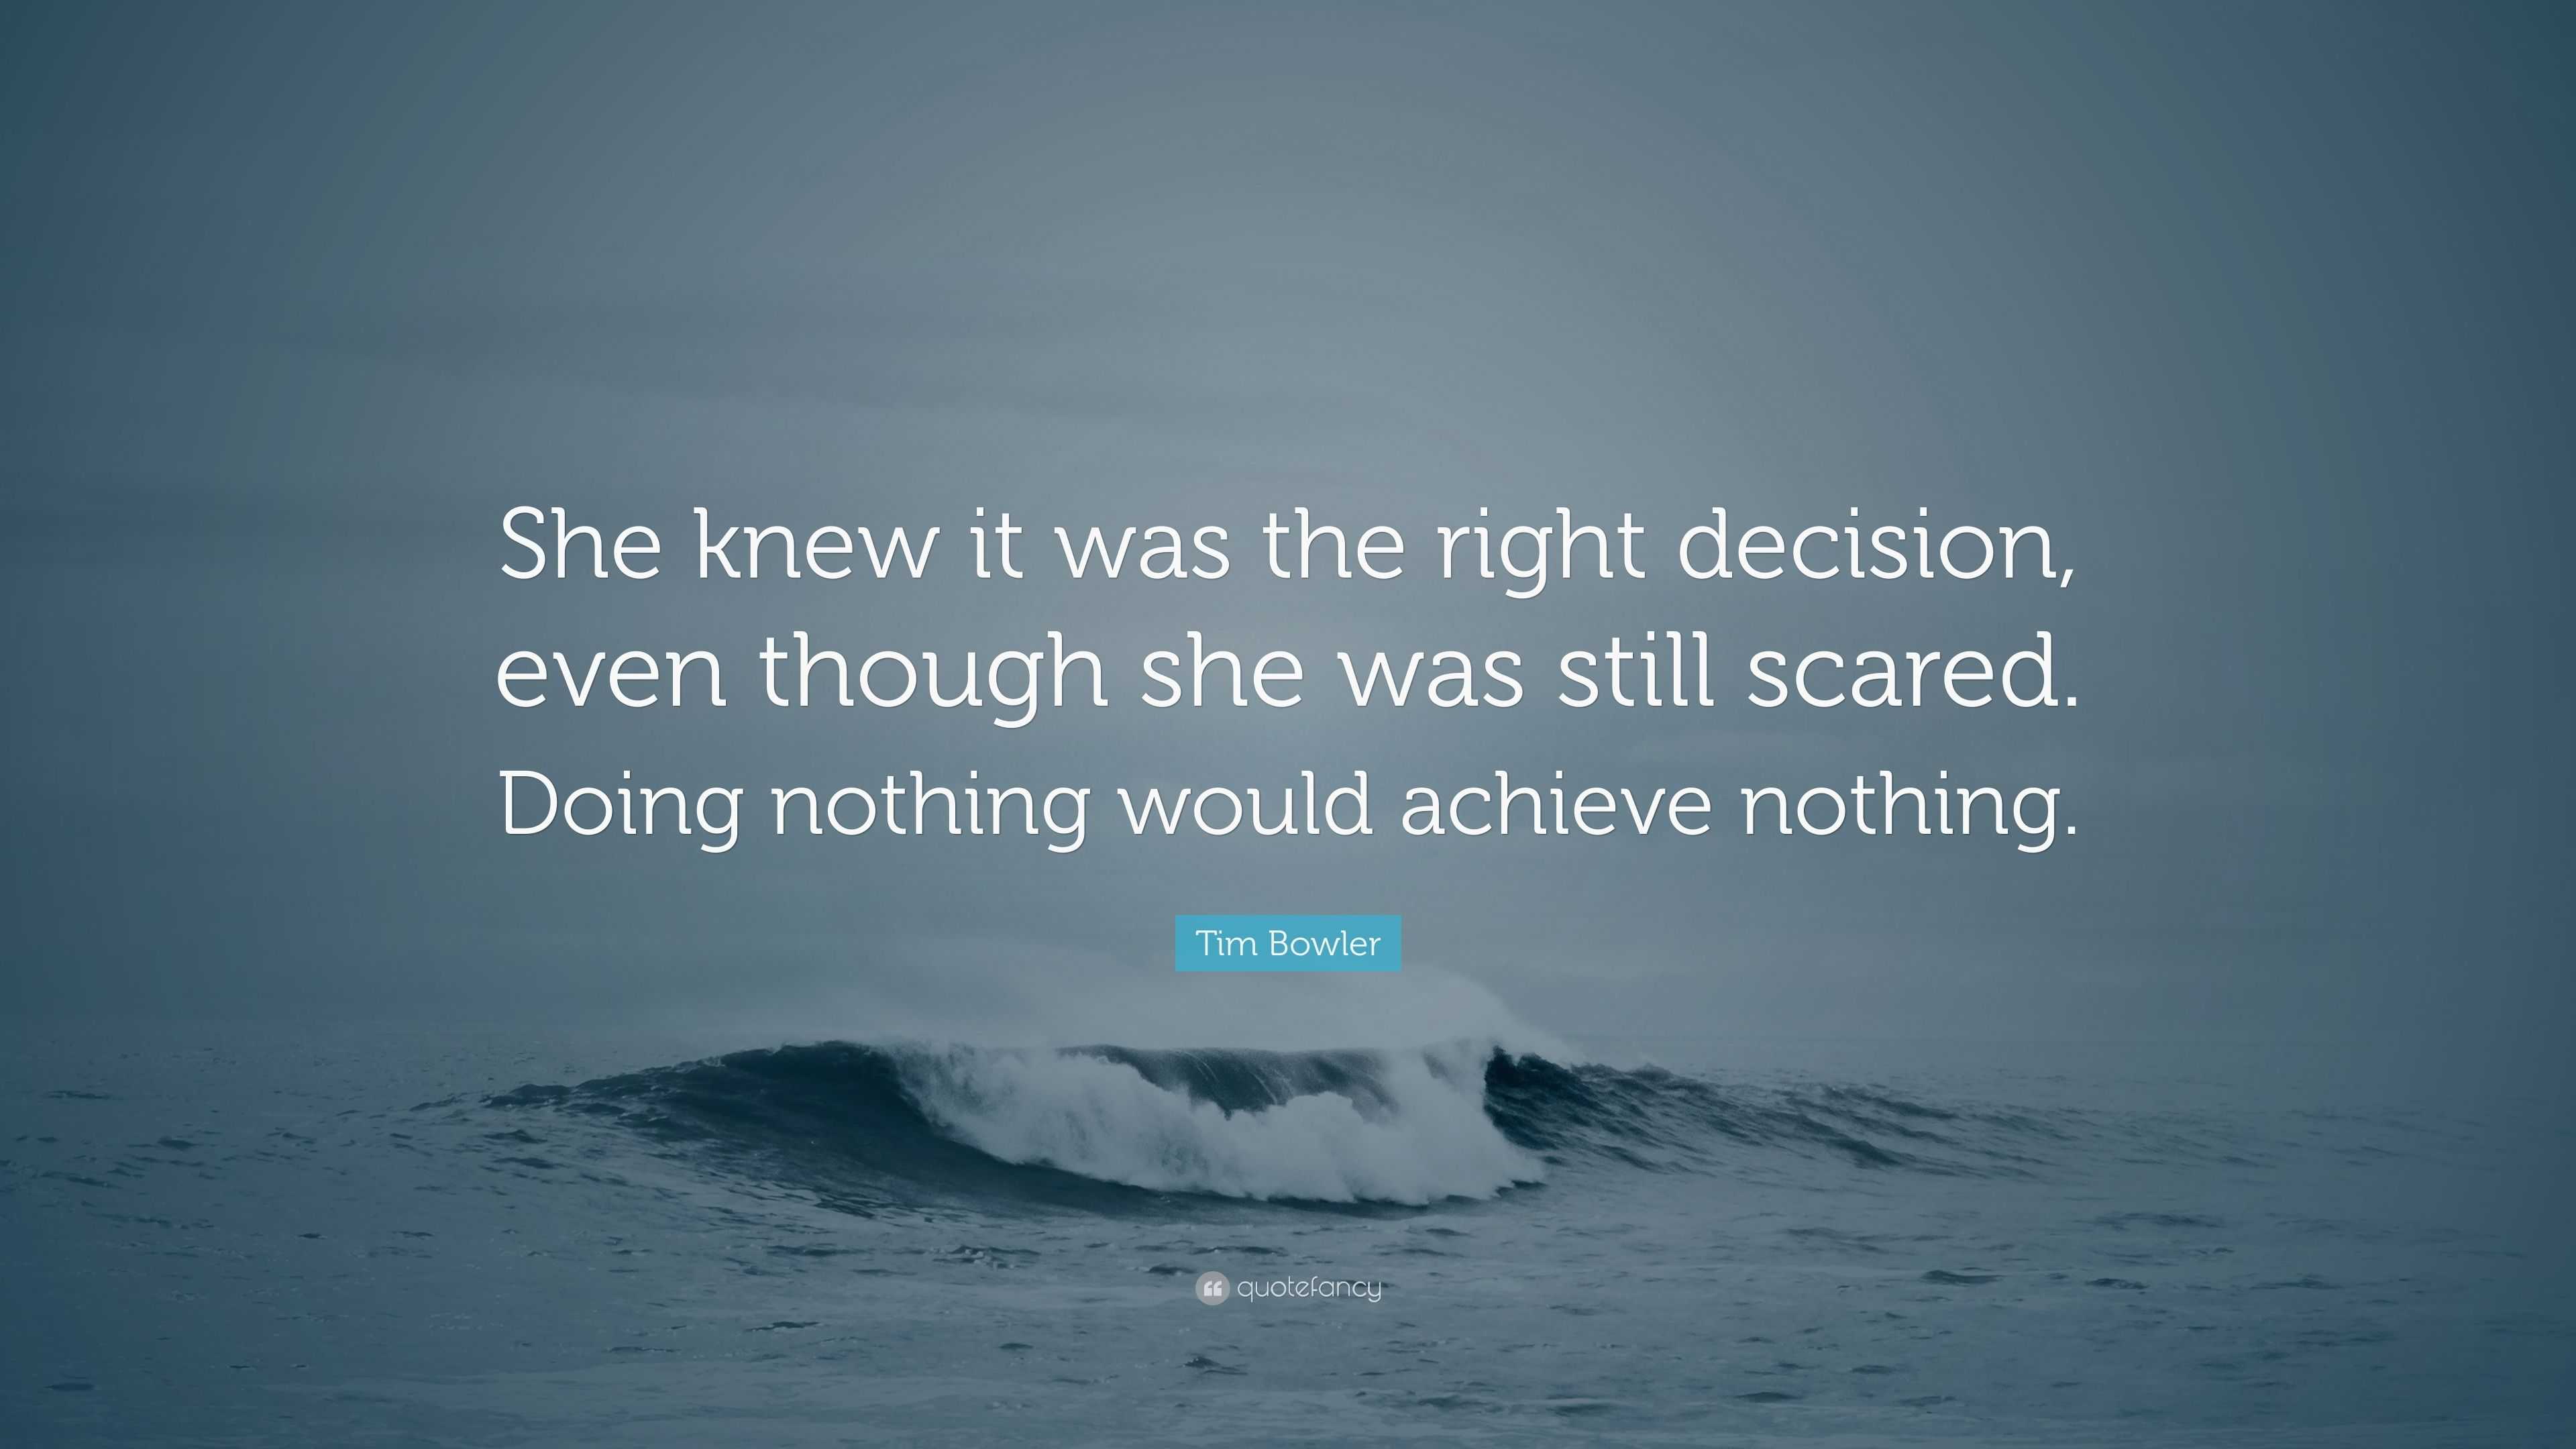 Tim Bowler Quote: “She knew it was the right decision, even though she ...